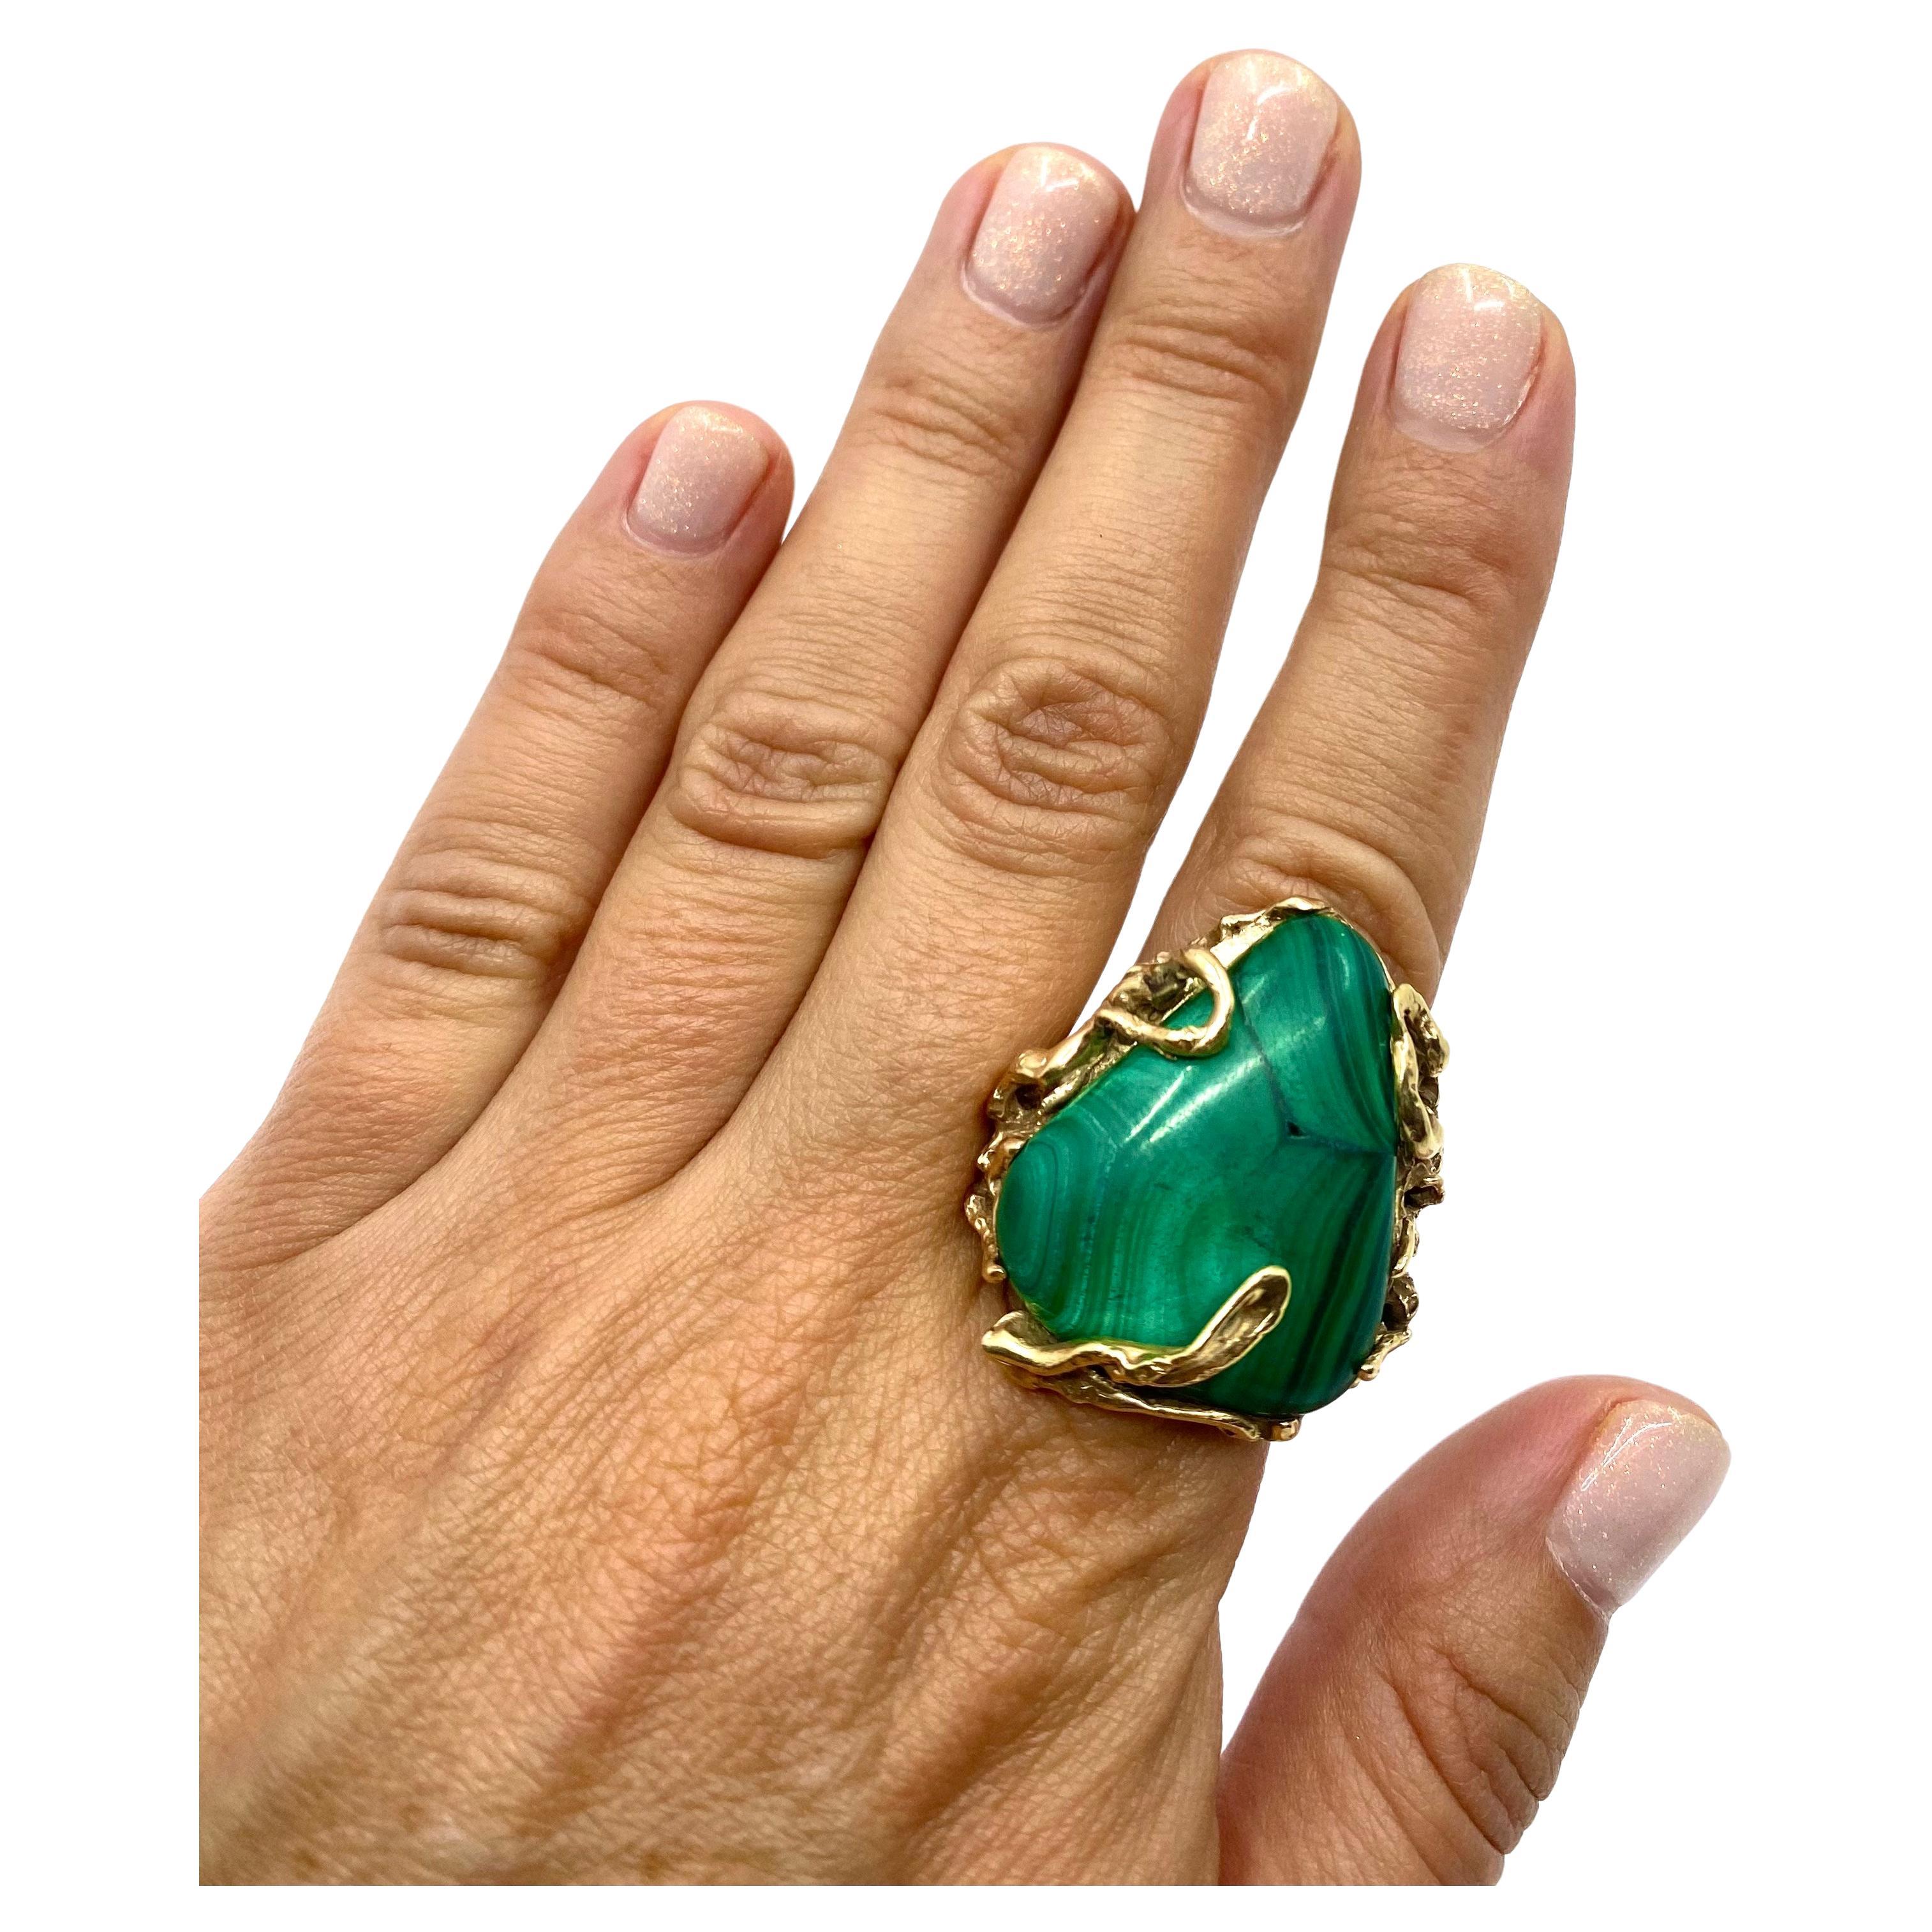 
A fascinating malachite ring, circa 1970s, made of 14k gold. The ring was artfully crafted by using the wax casting technique. A whimsical looking shank “hugs” the triangular malachite like a vine and overspills on the surface of the gem. This